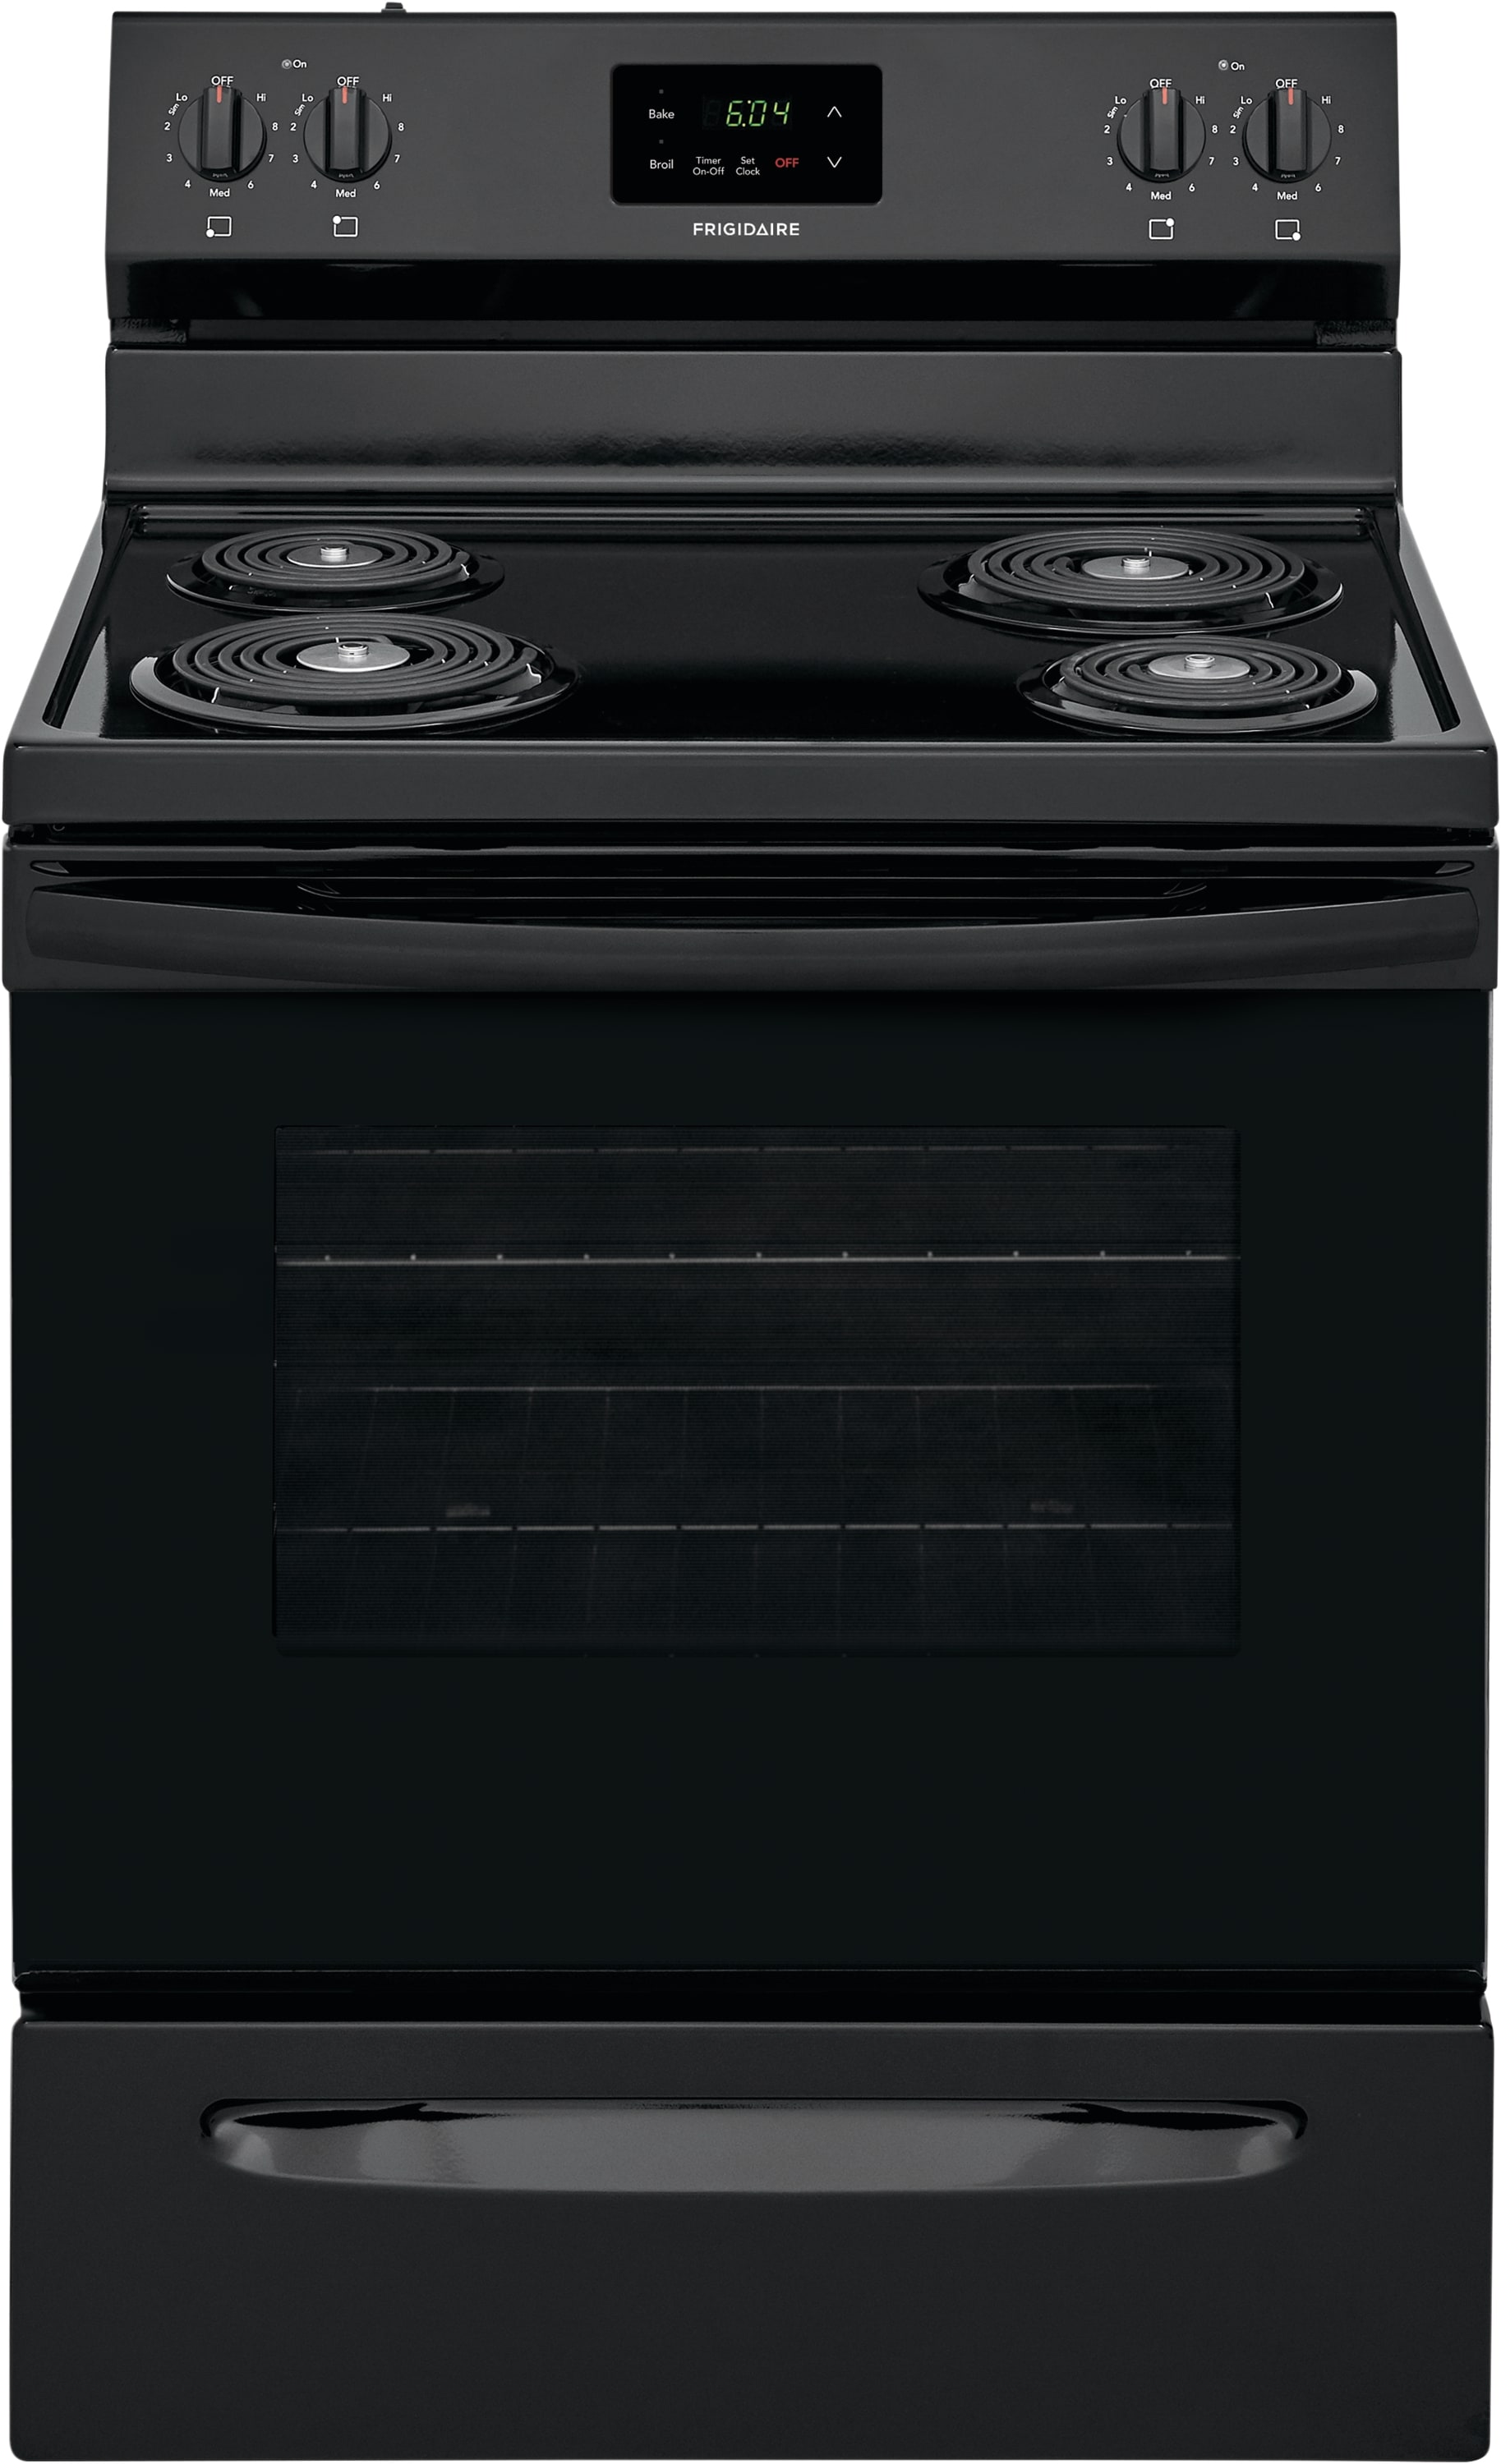 FRIDGIDAIRE 24 Stainless Steel Electric Stove 4 Coil Burners.